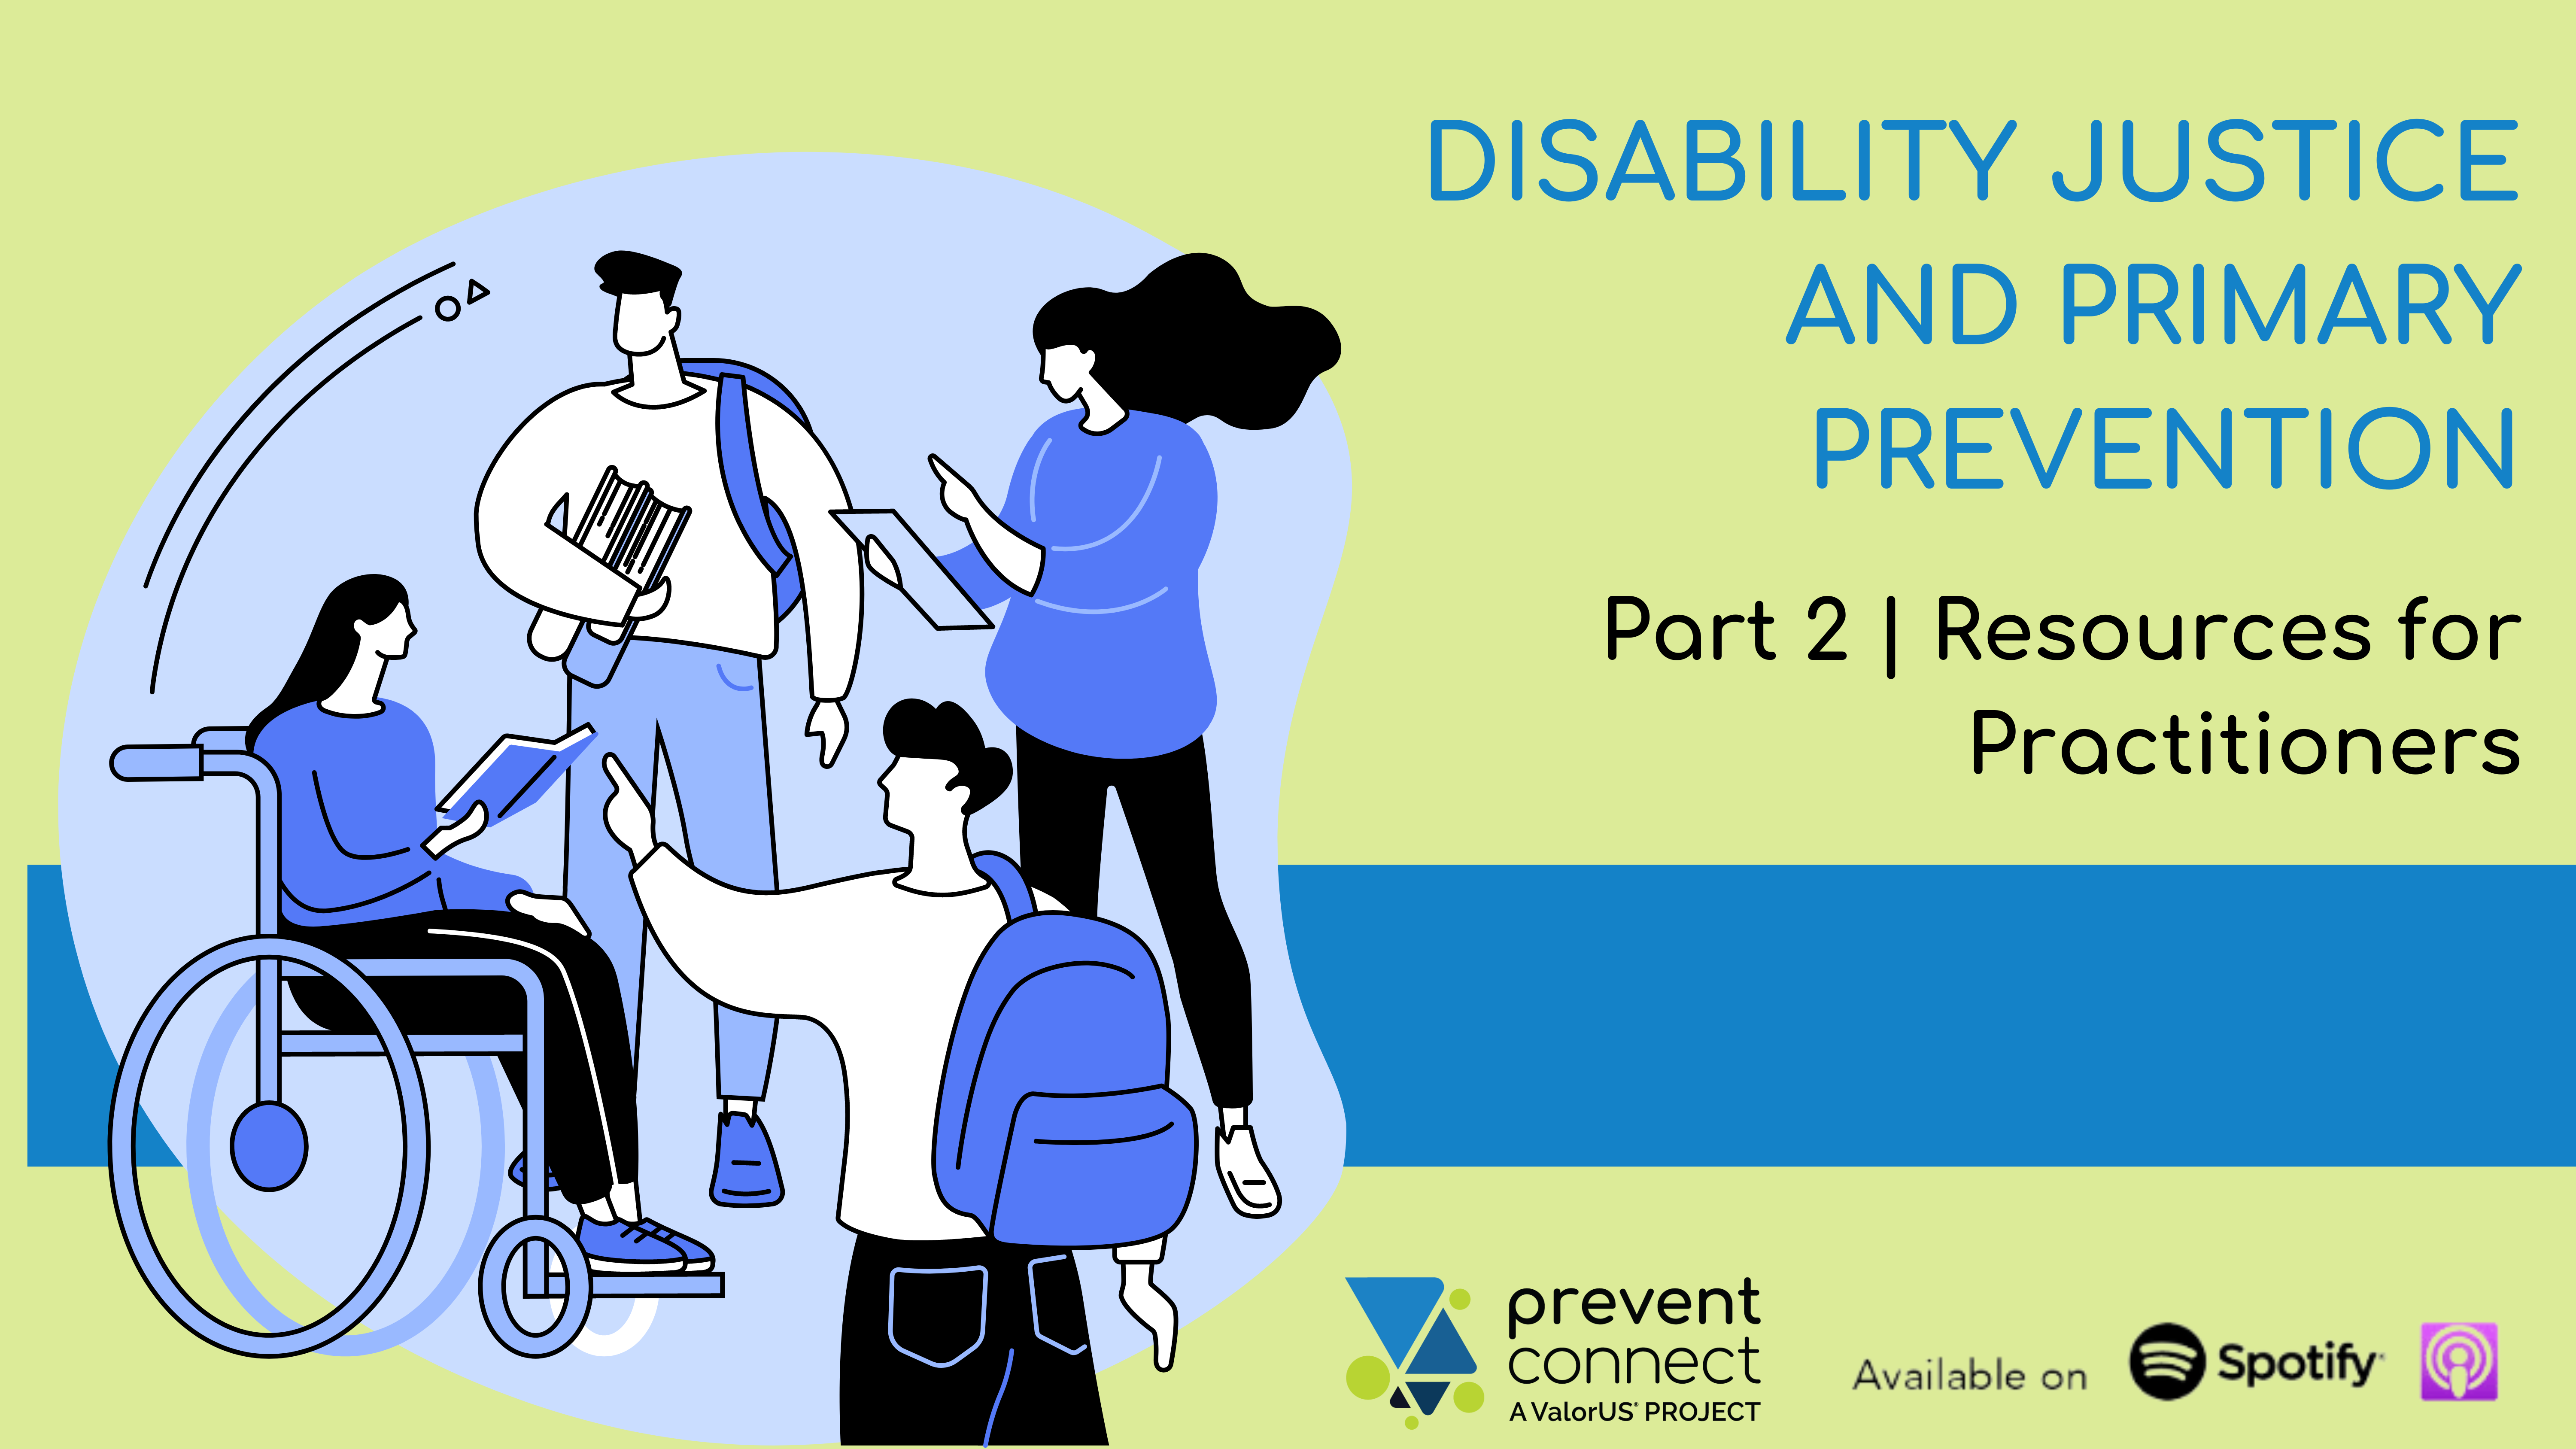 Disability Justice and Primary Prevent Part 2: Resources for Practitioners